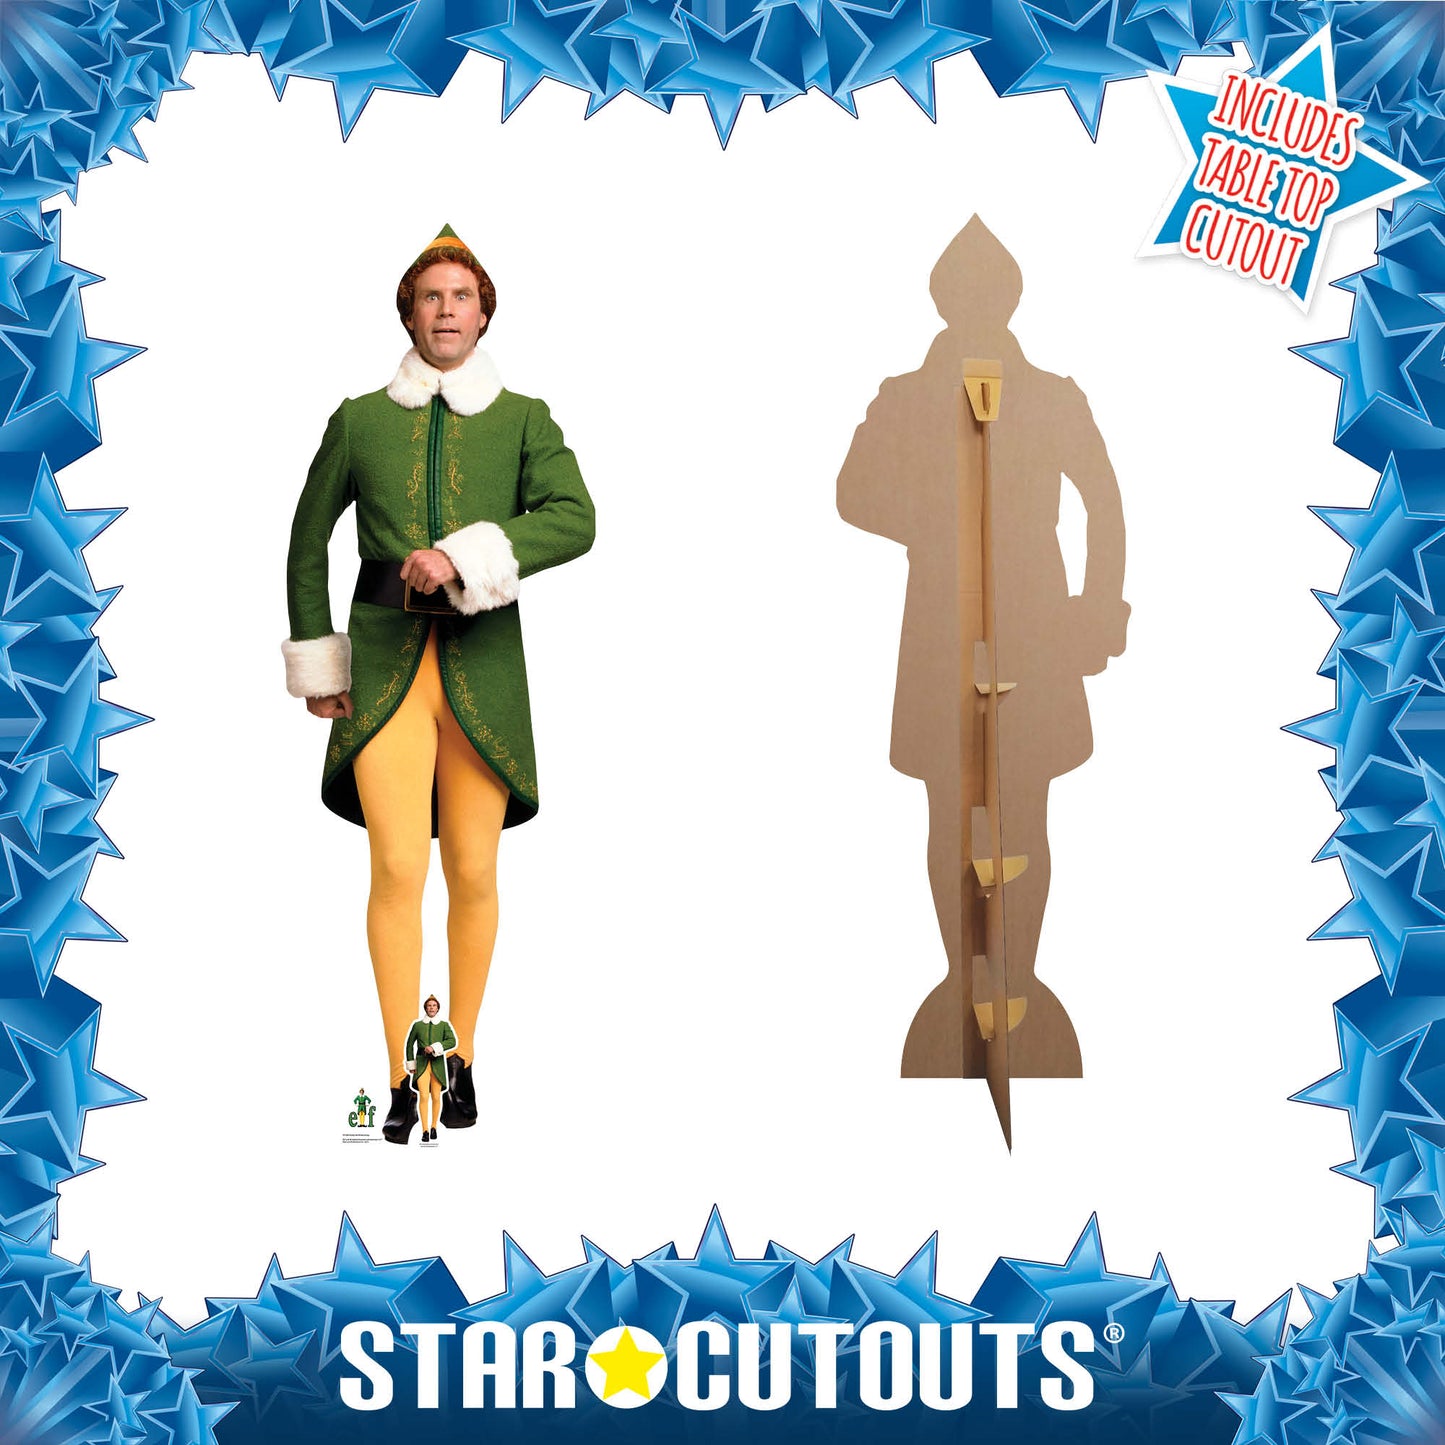 SC1688 Buddy the Elf Marching Cardboard Cut Out Height 188cm